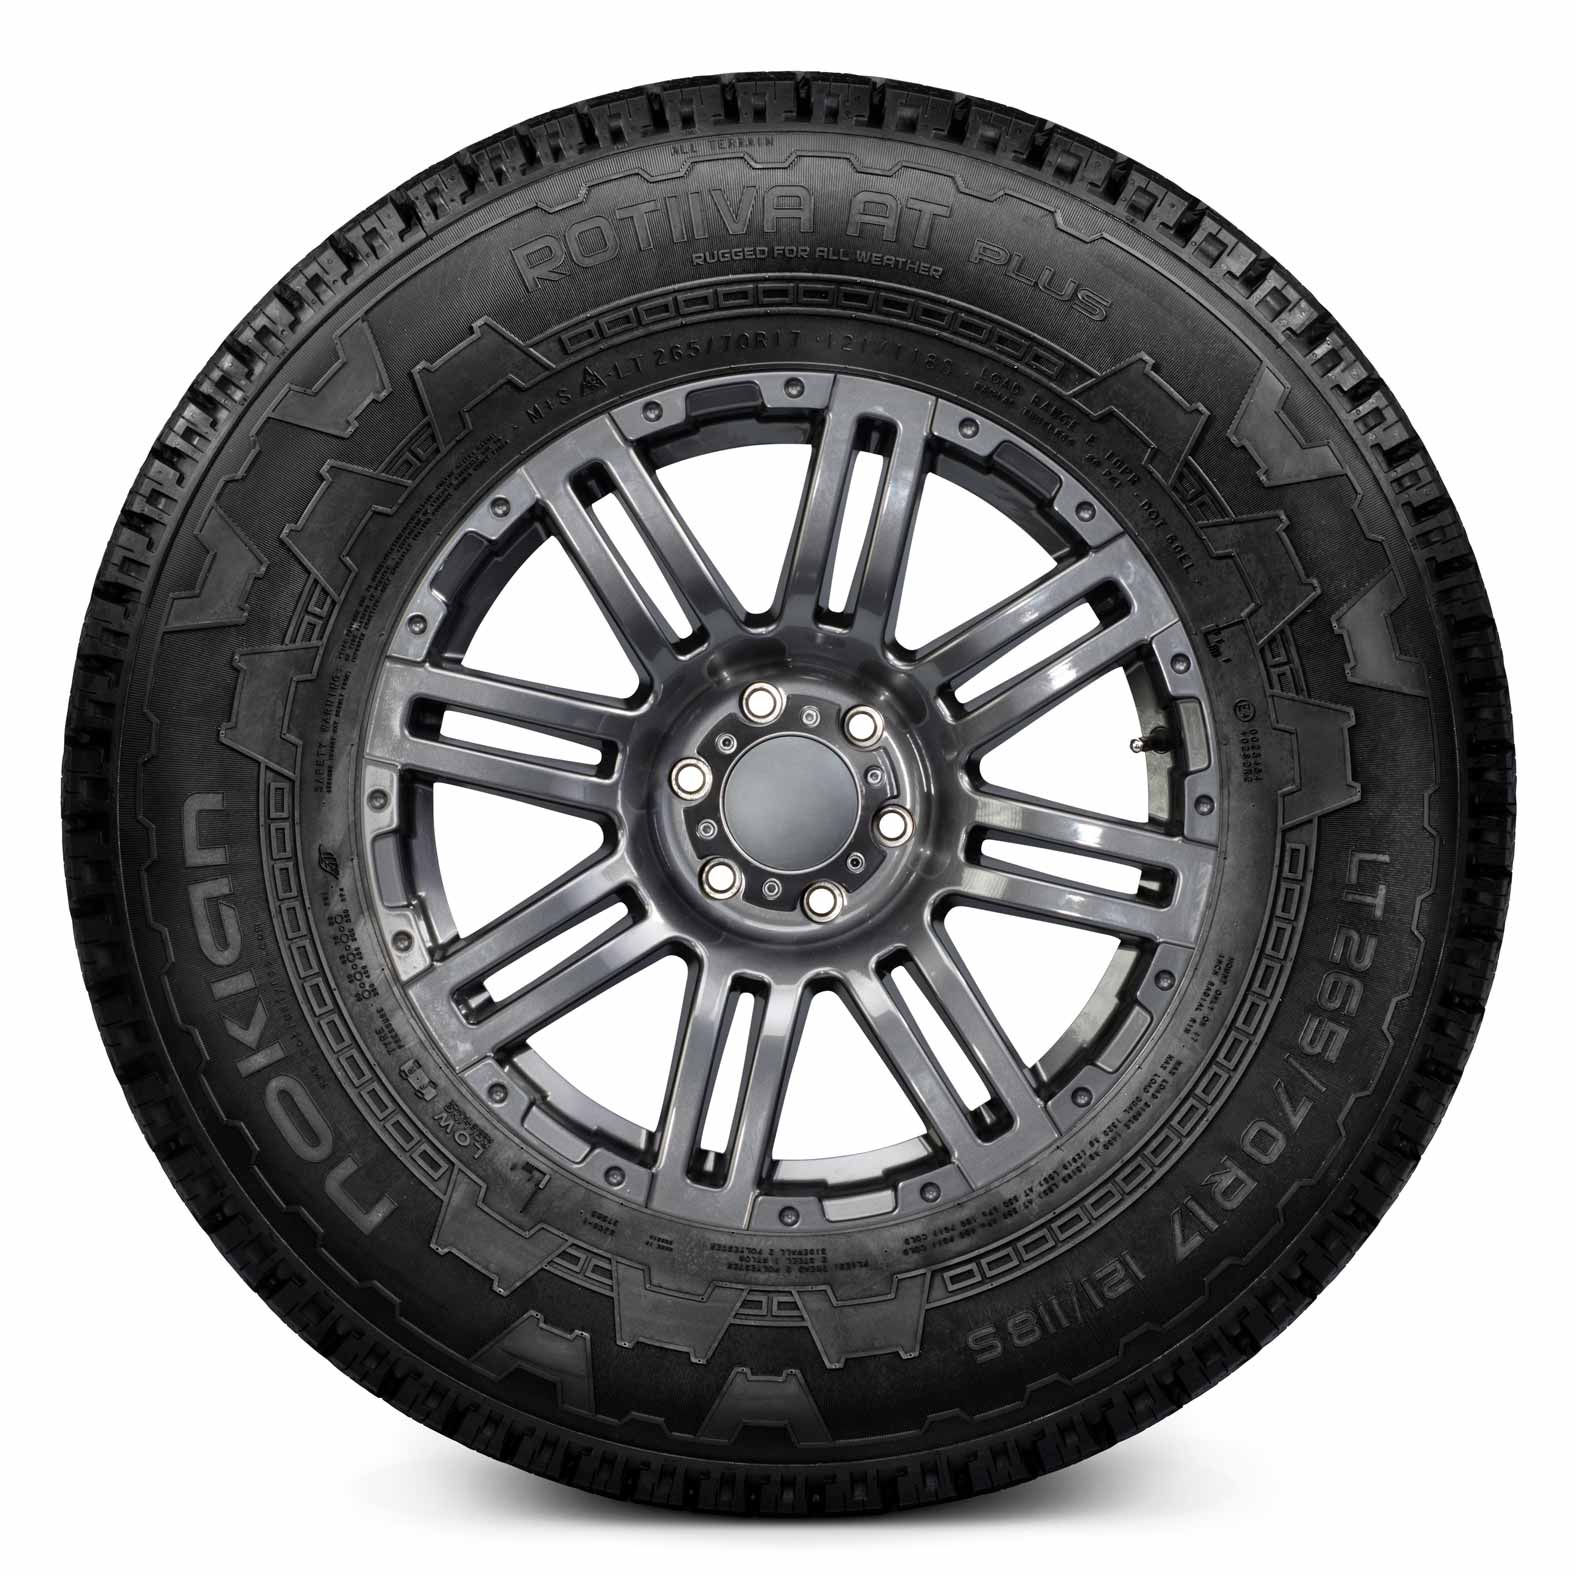 Nokian Rotiiva AT PLUS | Kal Tires All-Terrain Tire for